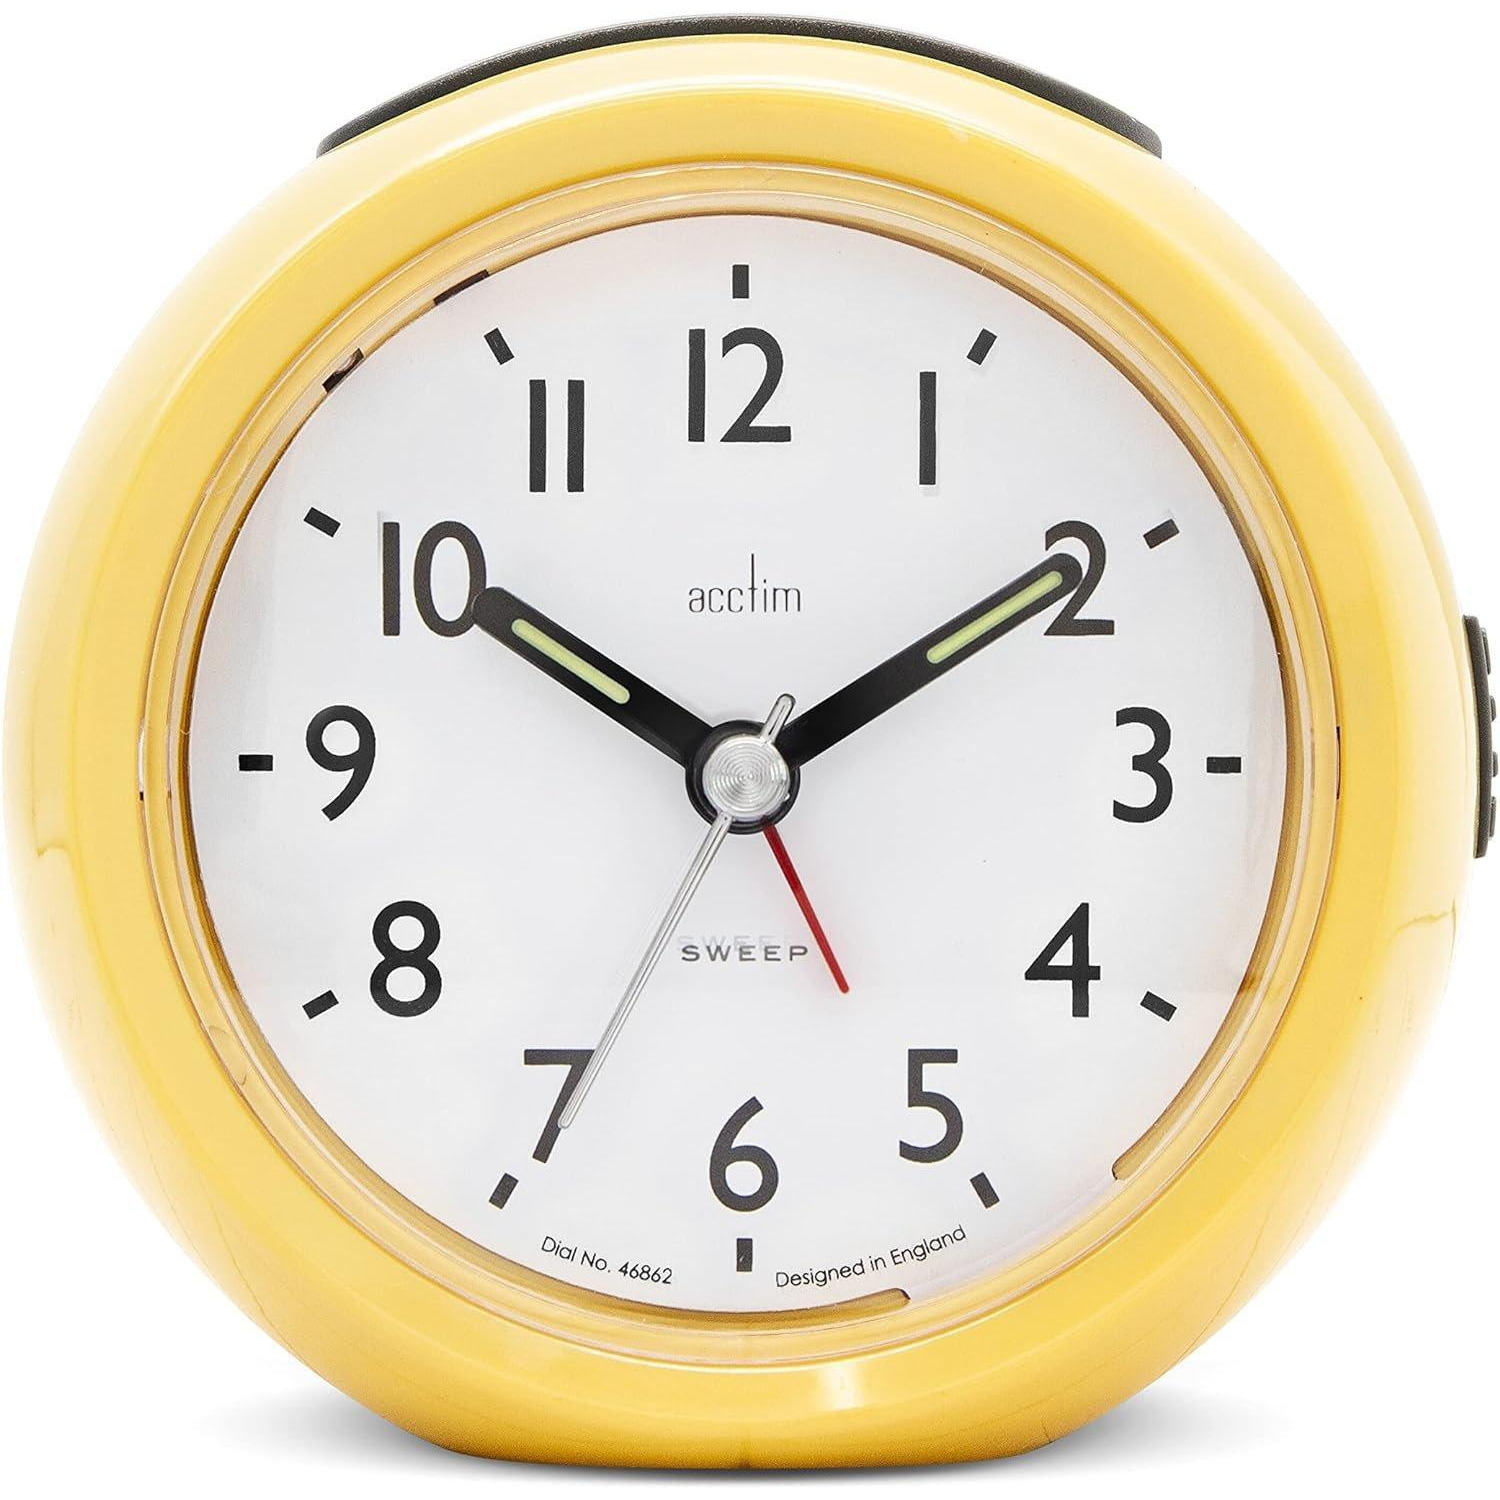 Grace Non-Ticking Sweep Analogue Bedroom Alarm Clock - image 1